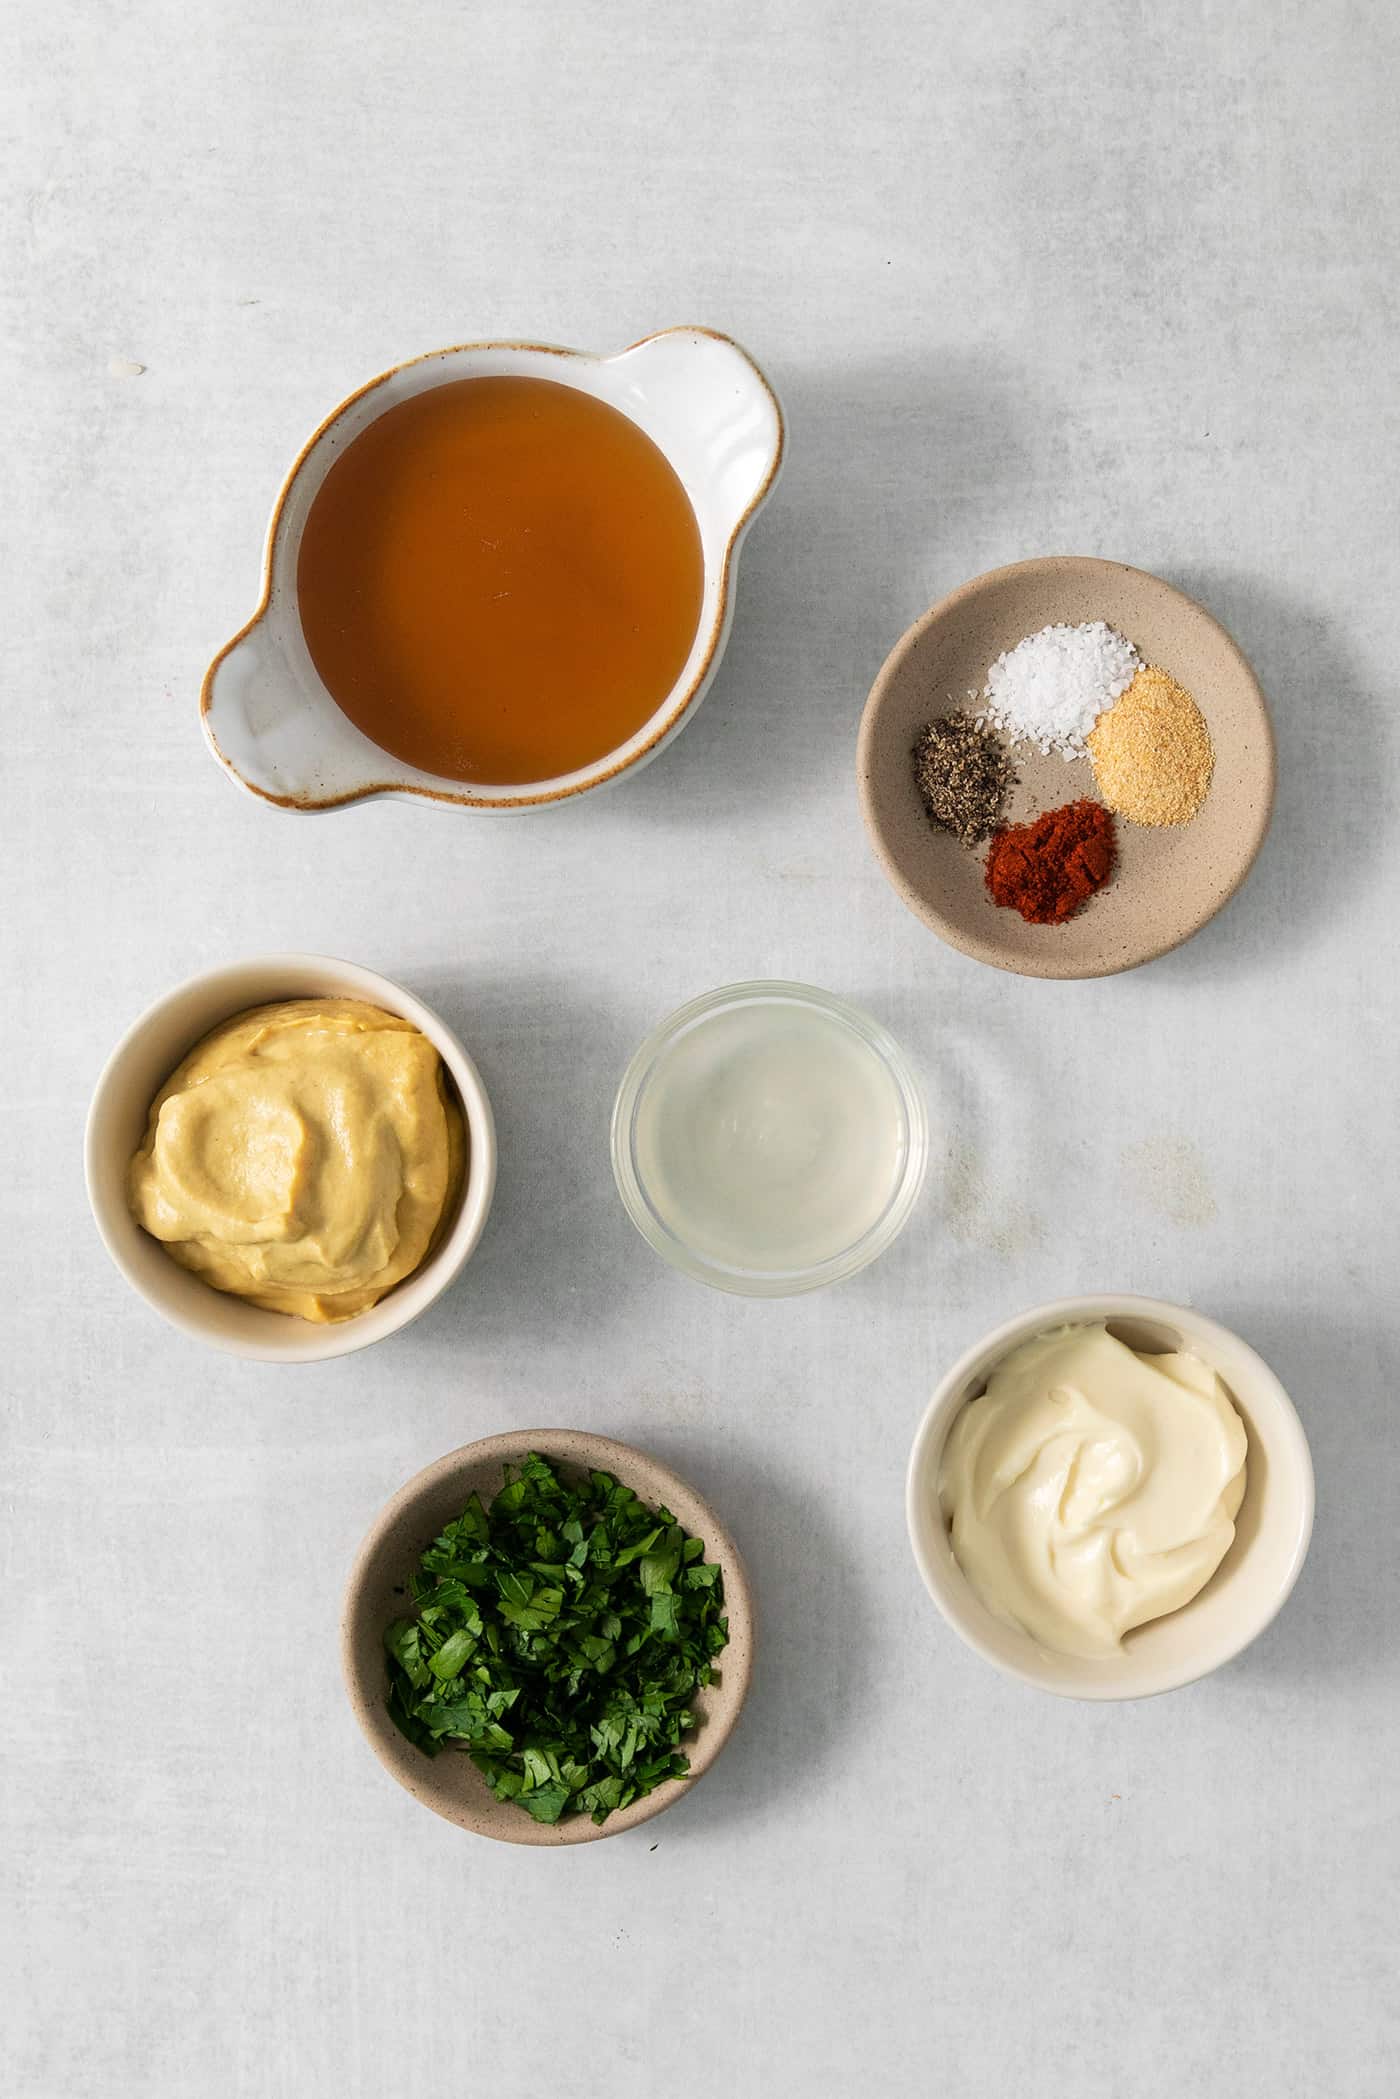 Ingredients for honey mustard dip are shown portioned out: honey, Dijon mustard, mayonnaise, spices, parsley, salt.